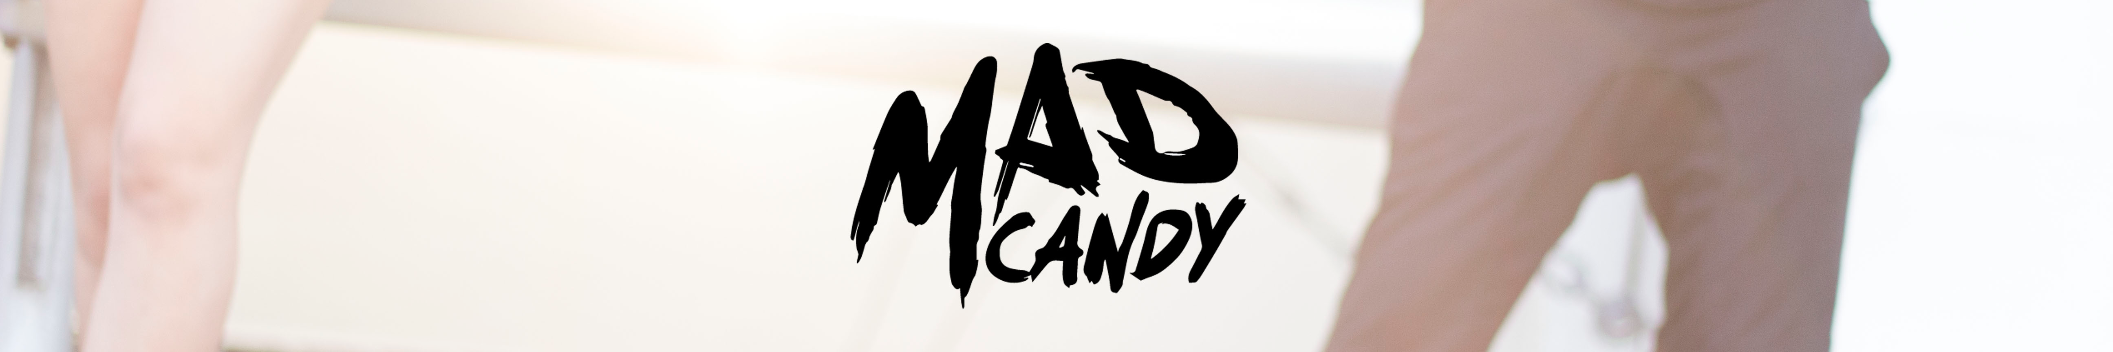 MAD CANDY